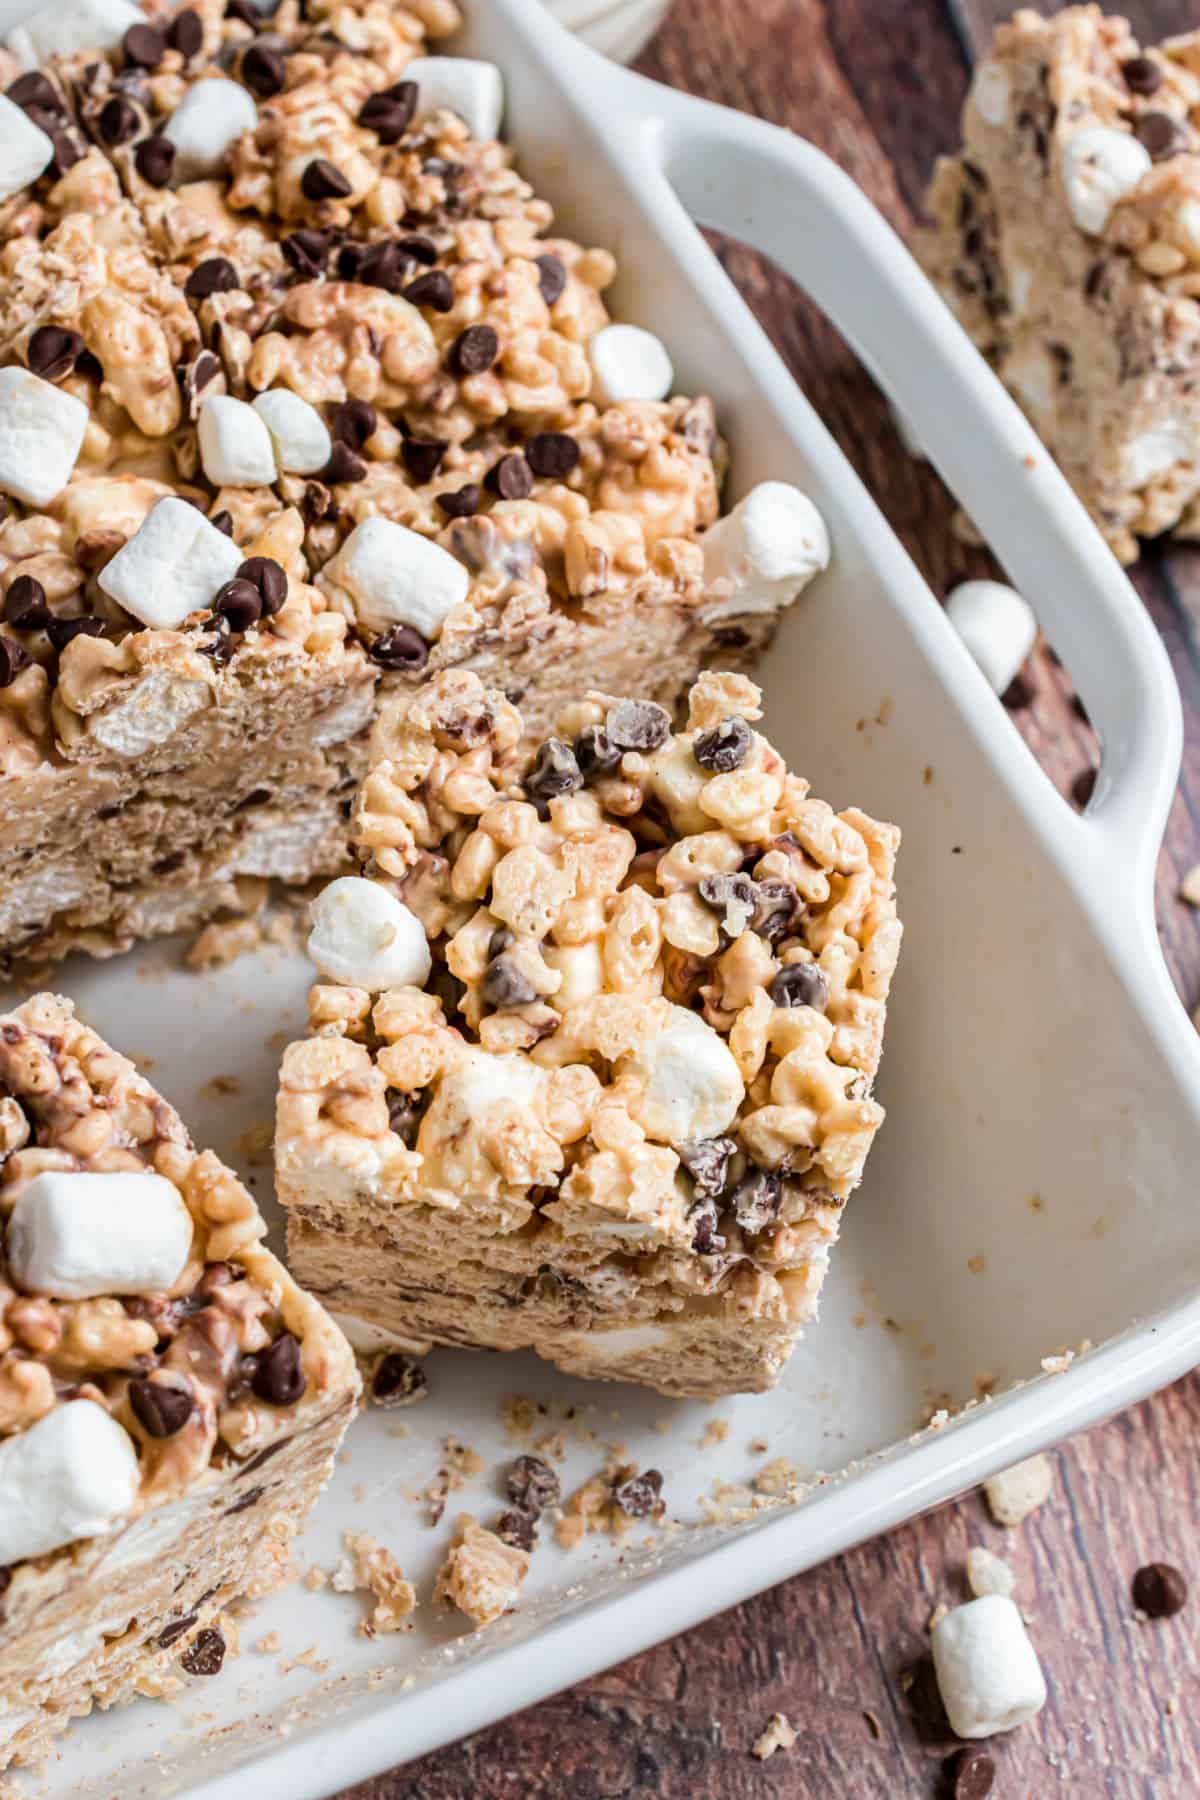 Peanut butter krispie treats with marshmallow and chocolate chips in a white baking dish.